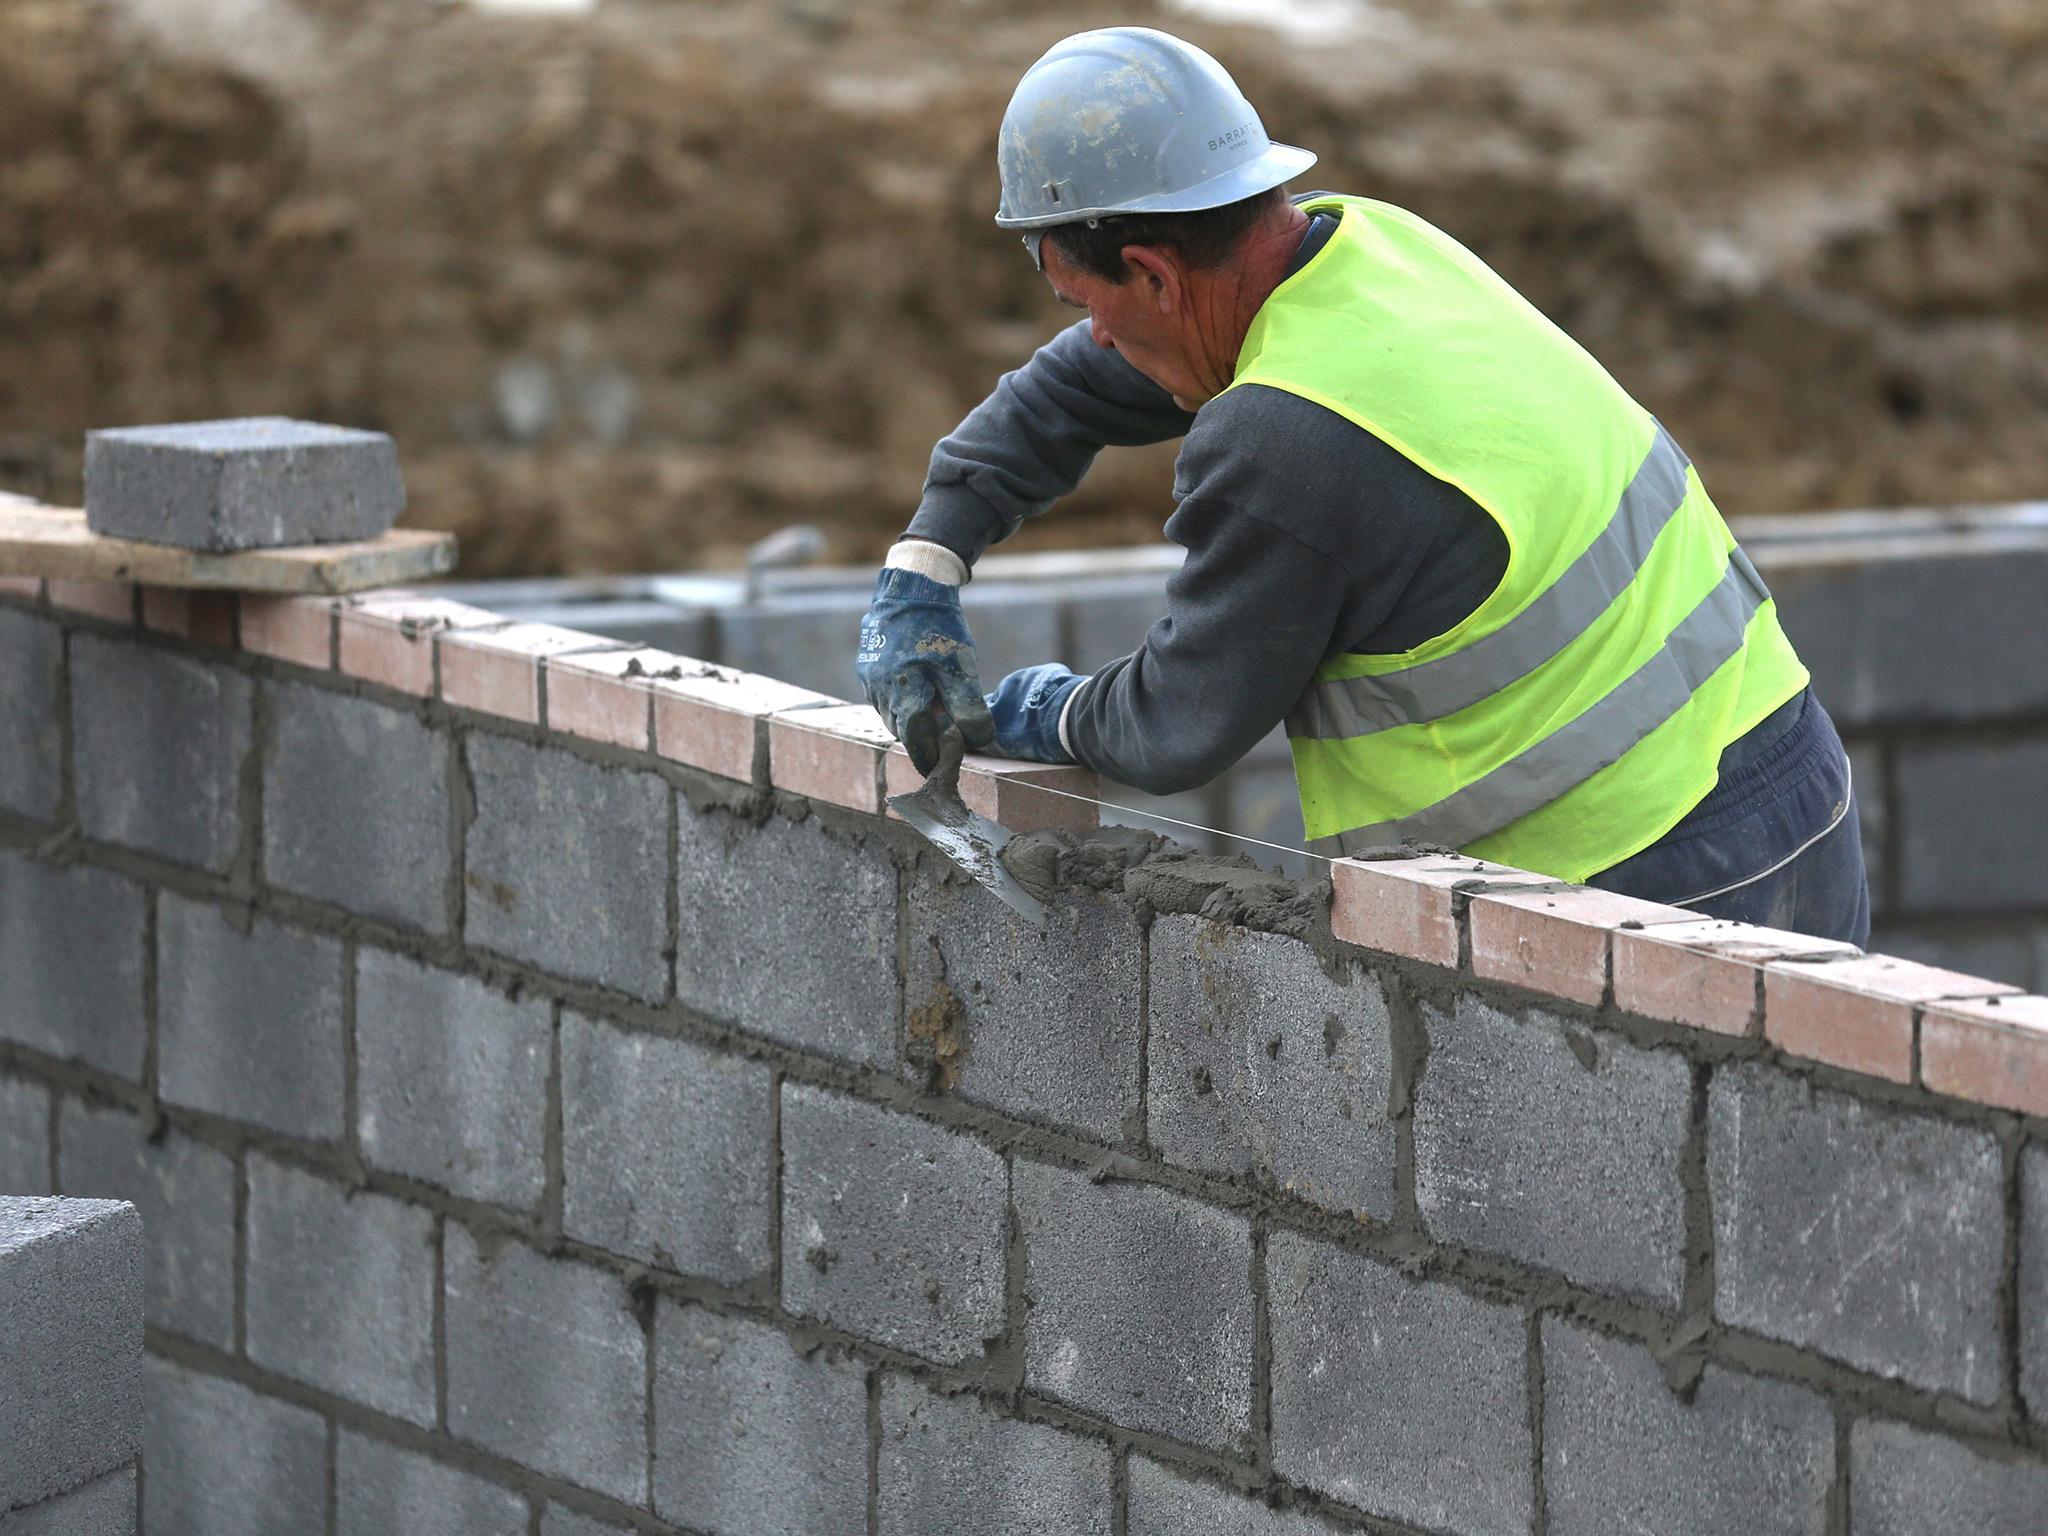 'Viability assessments' have been used to slash affordable housebuilding by 79 per cent, research suggests